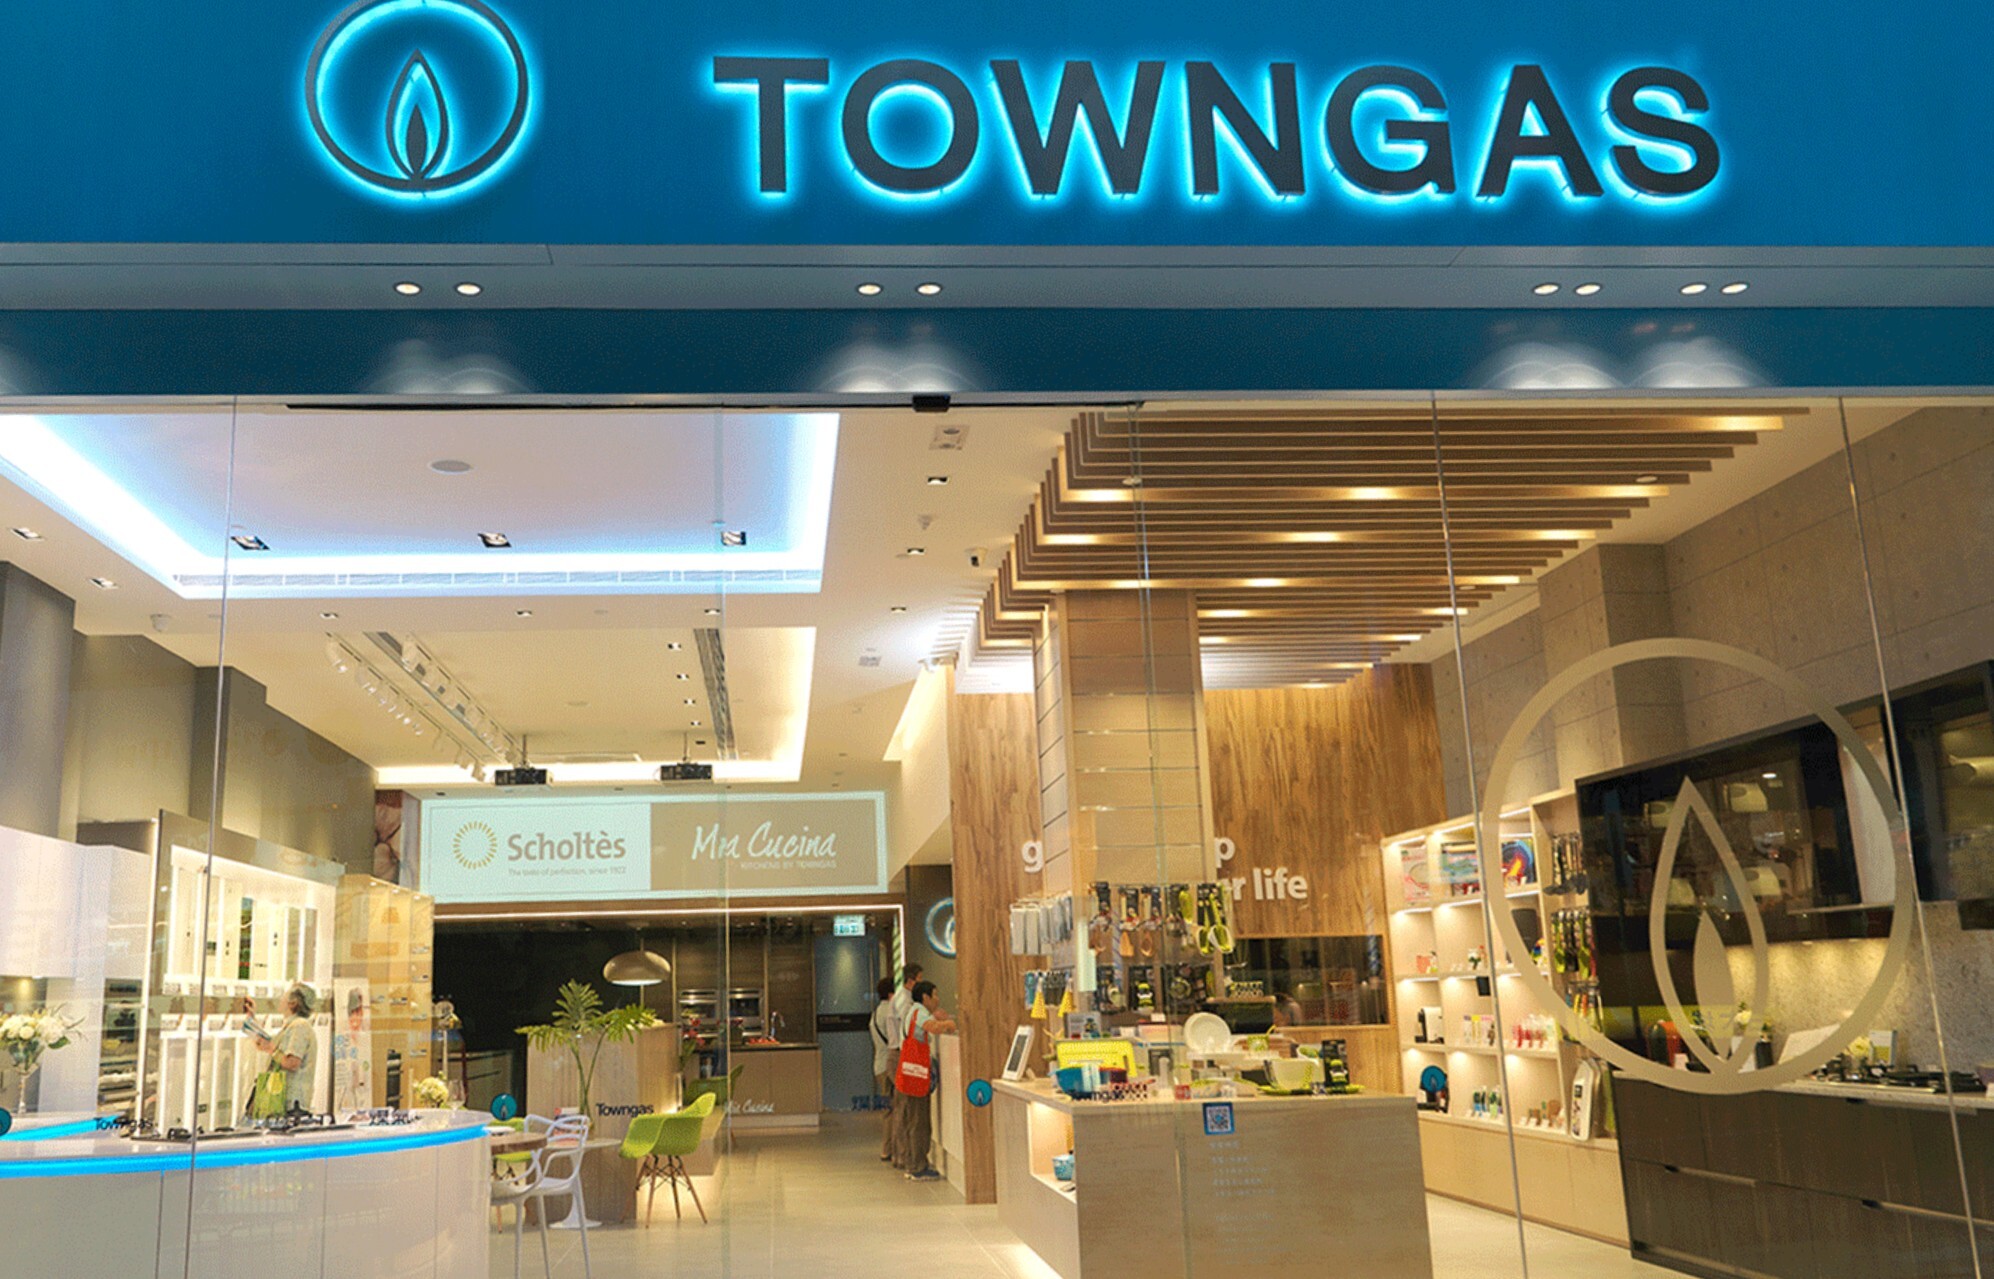 Towngas China said it will begin offering carbon auditing, asset management and trading capabilities to its customers. Photo: SCMP Handout